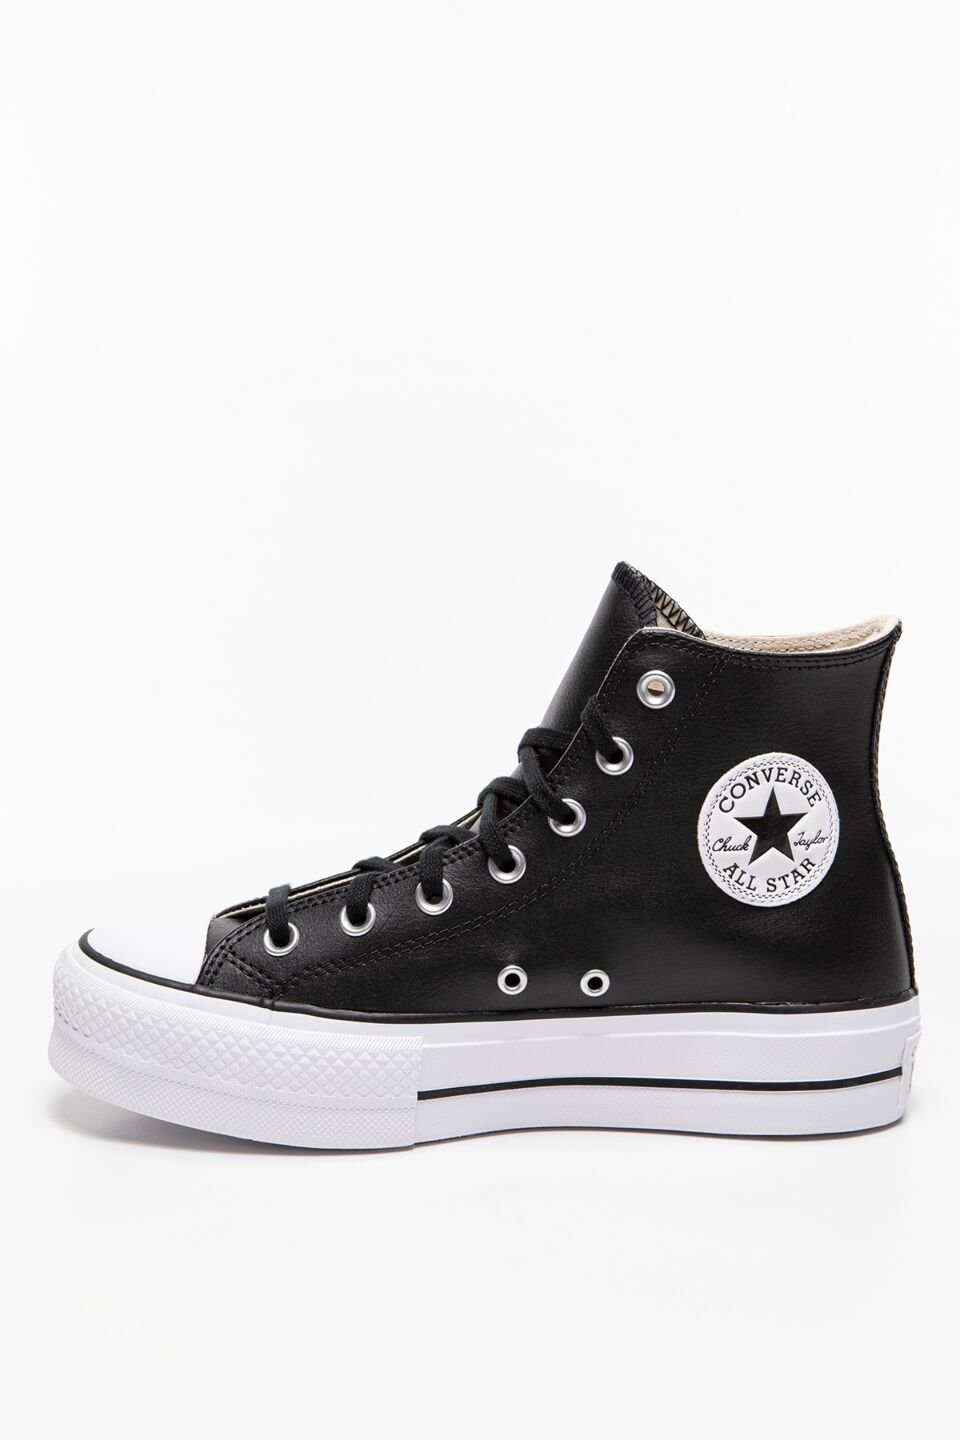 converse black leather chuck taylor all star lift hi sneakers